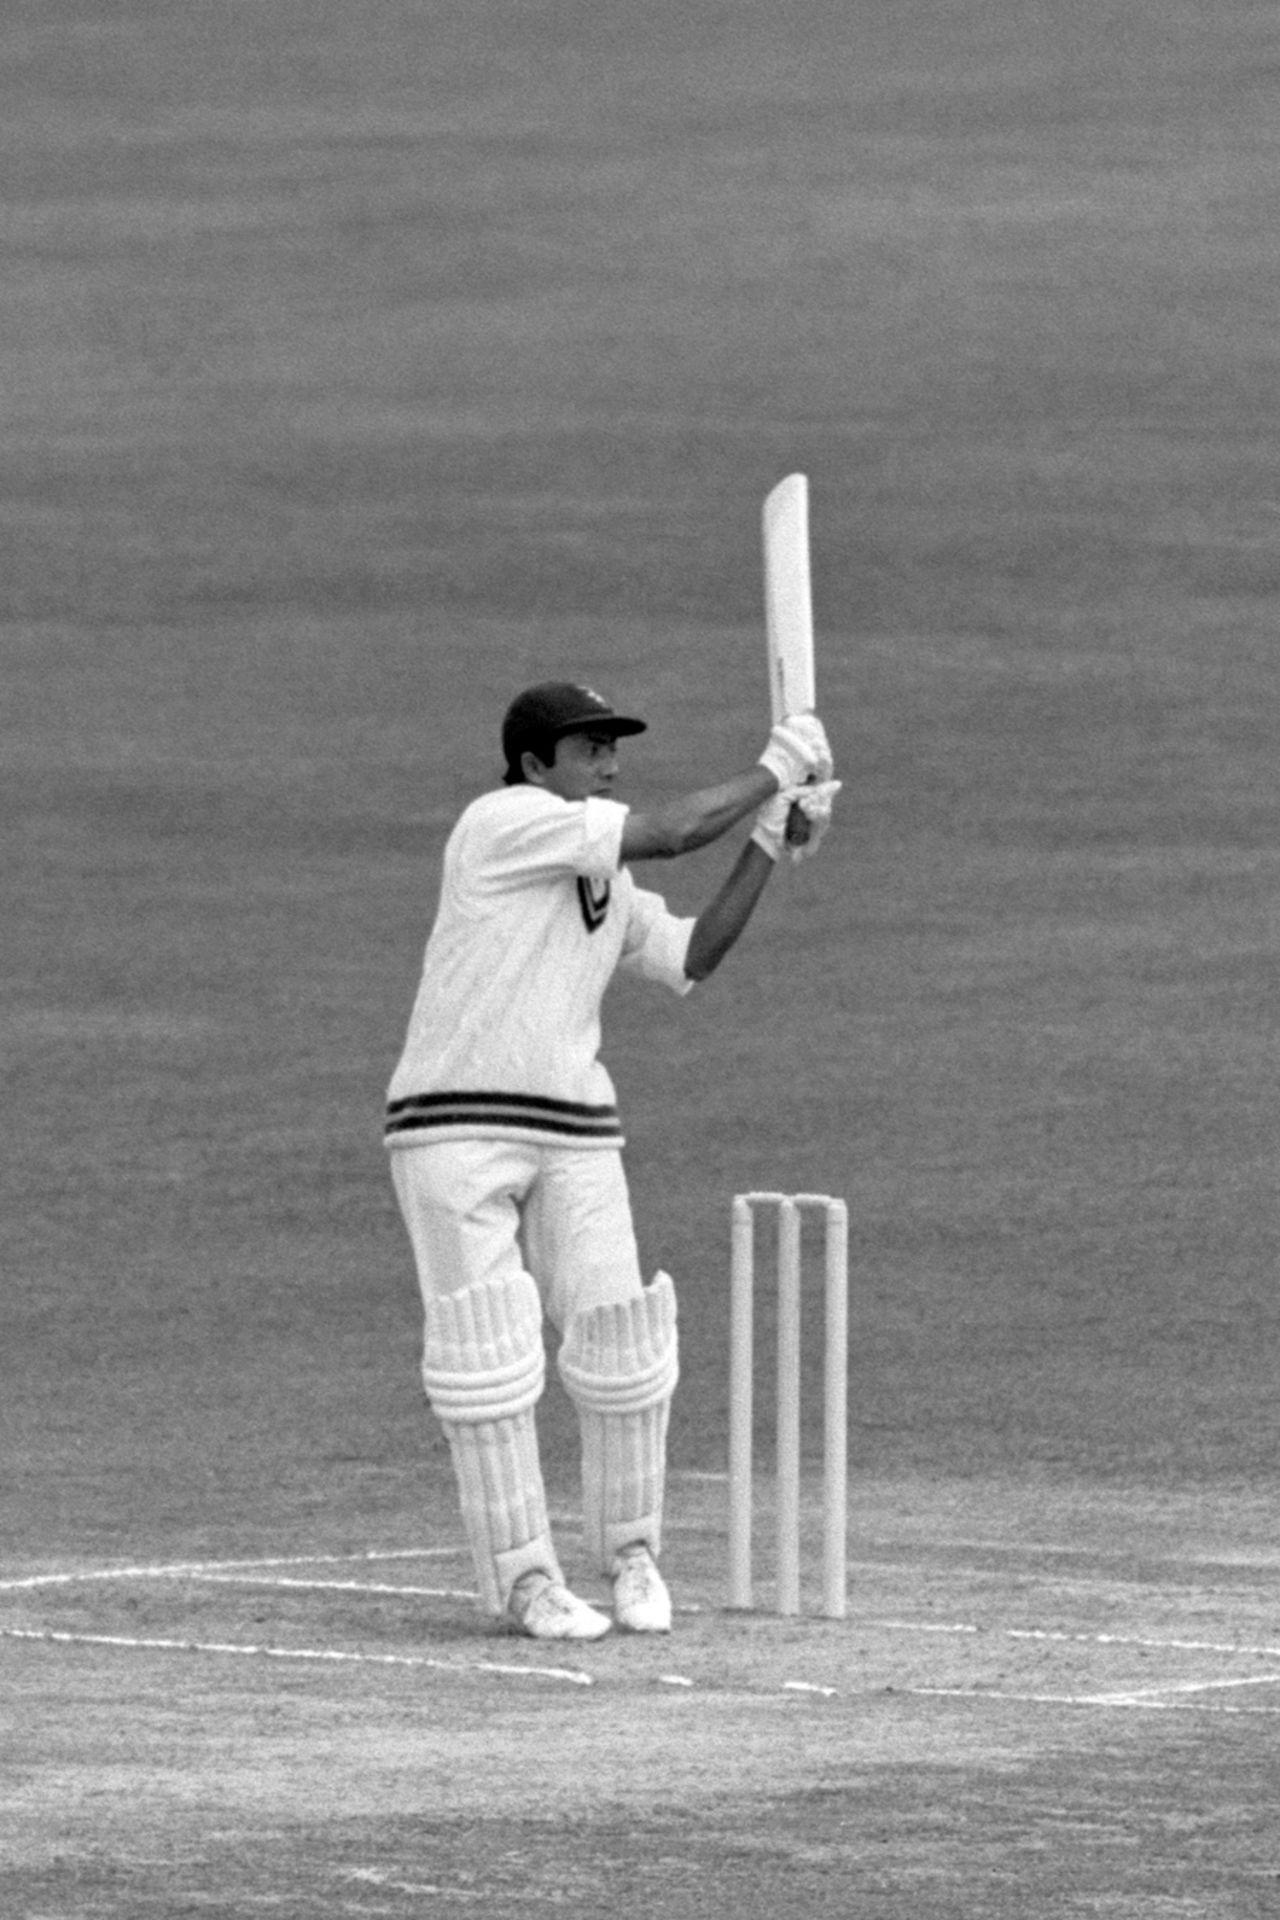 Hanif Mohammad pulls the ball to the boundary, Lord's, 1967
